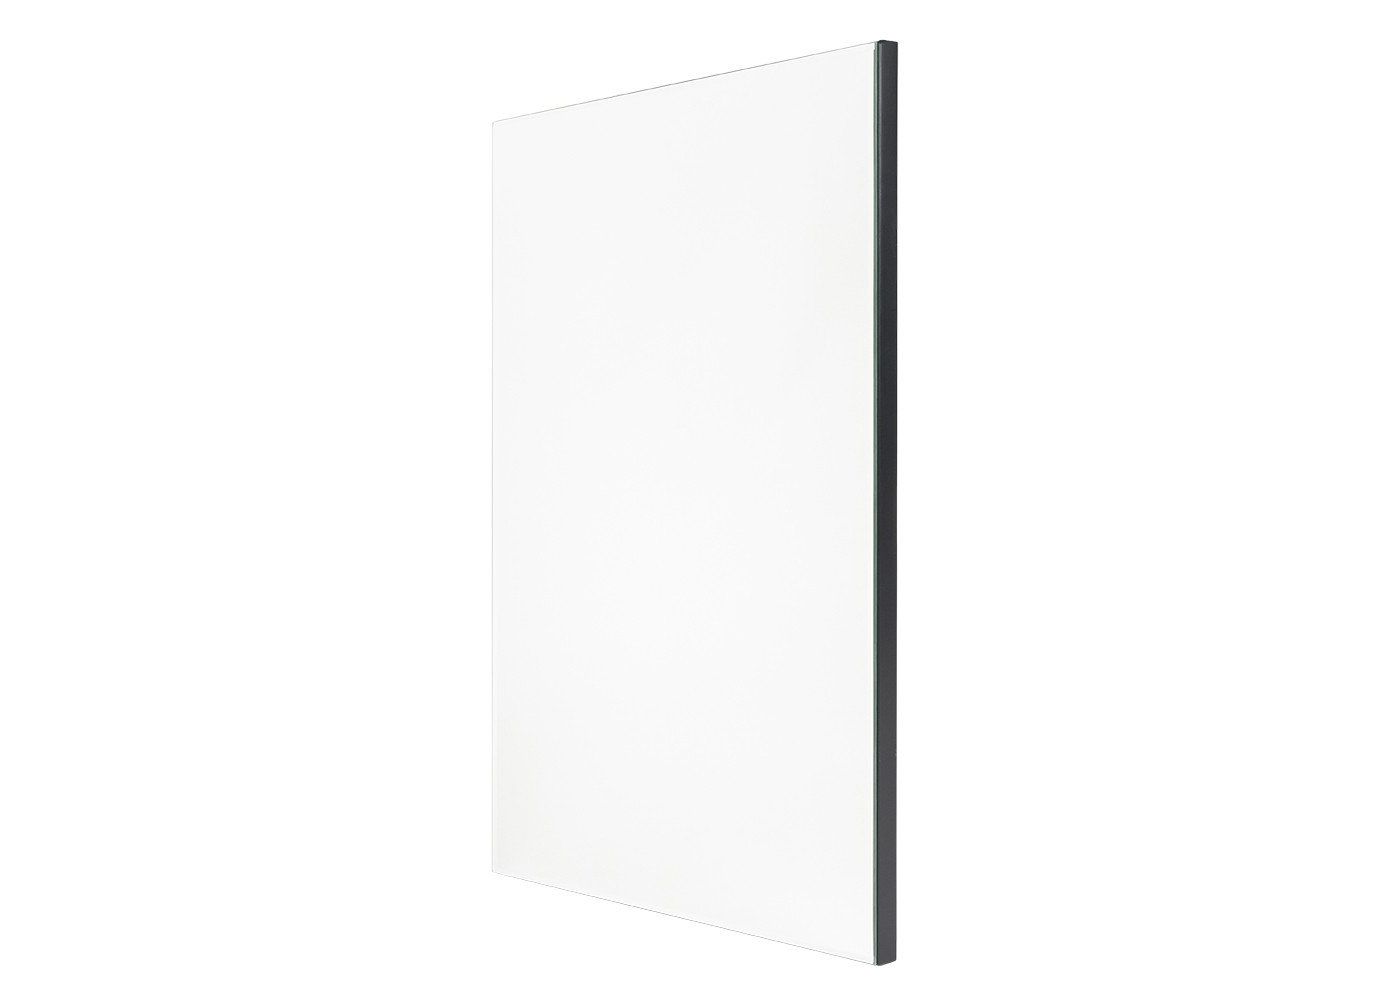 Bevelled Edge Wall Mirror Rectangular Throughout Popular Extra Large Bevelled Edge Wall Mirrors (View 20 of 20)